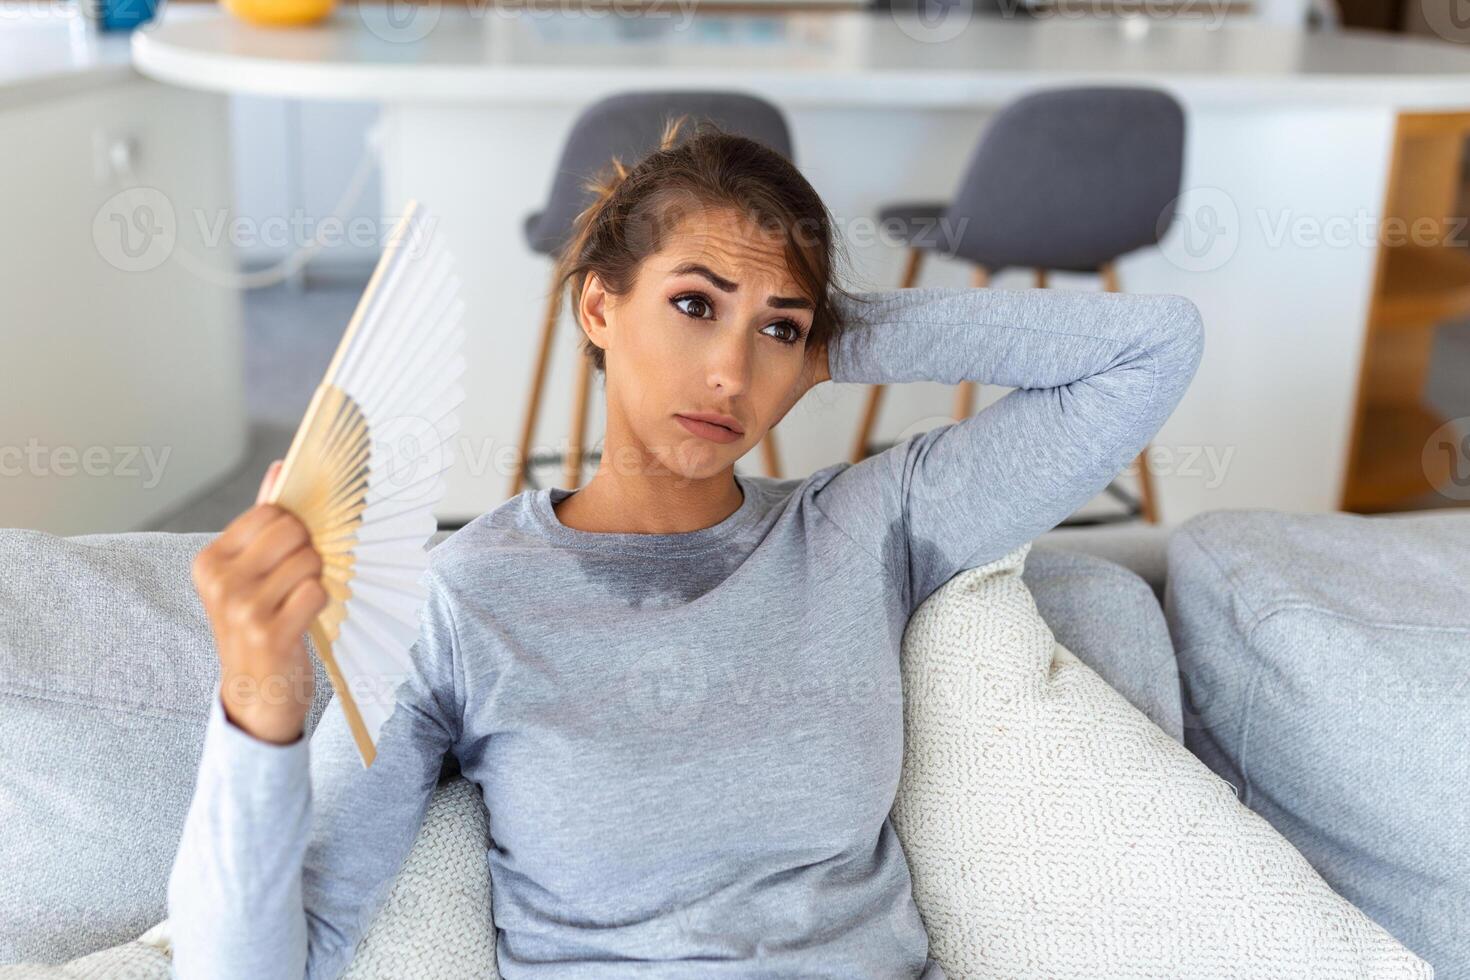 Woman puts head on sofa cushions feels sluggish due unbearable heat, waves hand fan cool herself, hot summer flat without air-conditioner climate control system concept photo